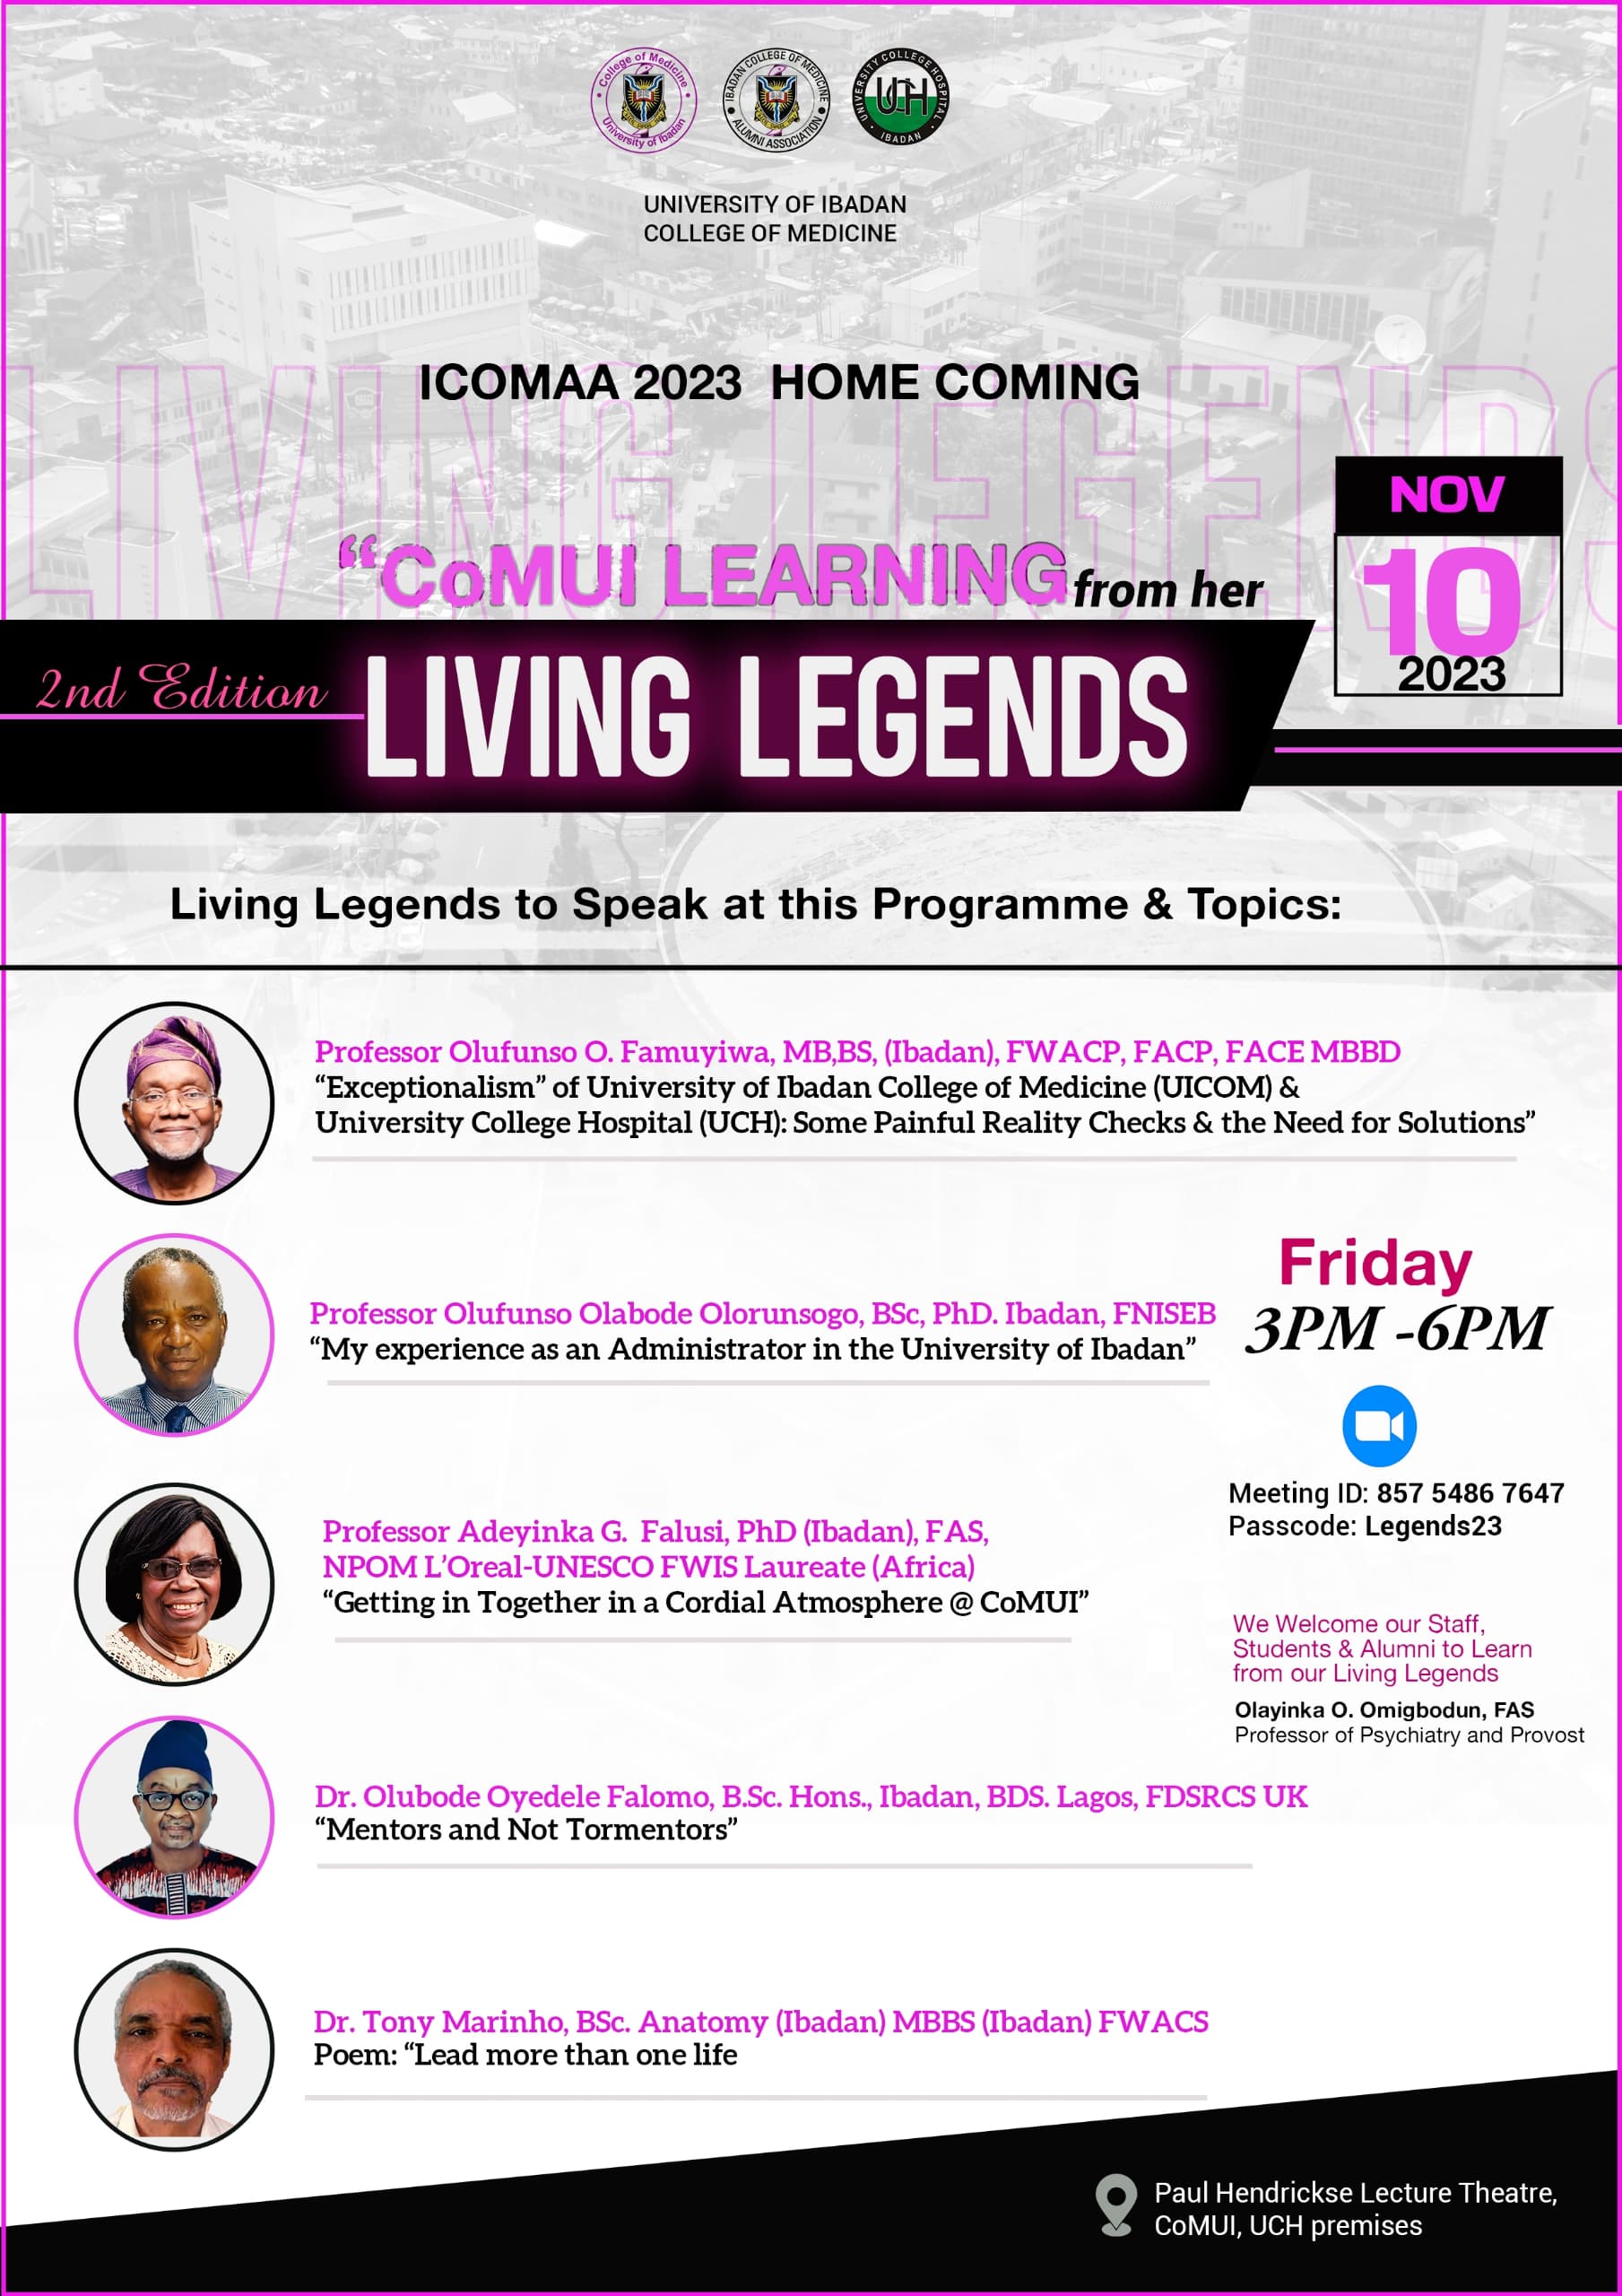 PROFILE OF SPEAKERS AT THE COMUI LIVING LEGENDS EVENT